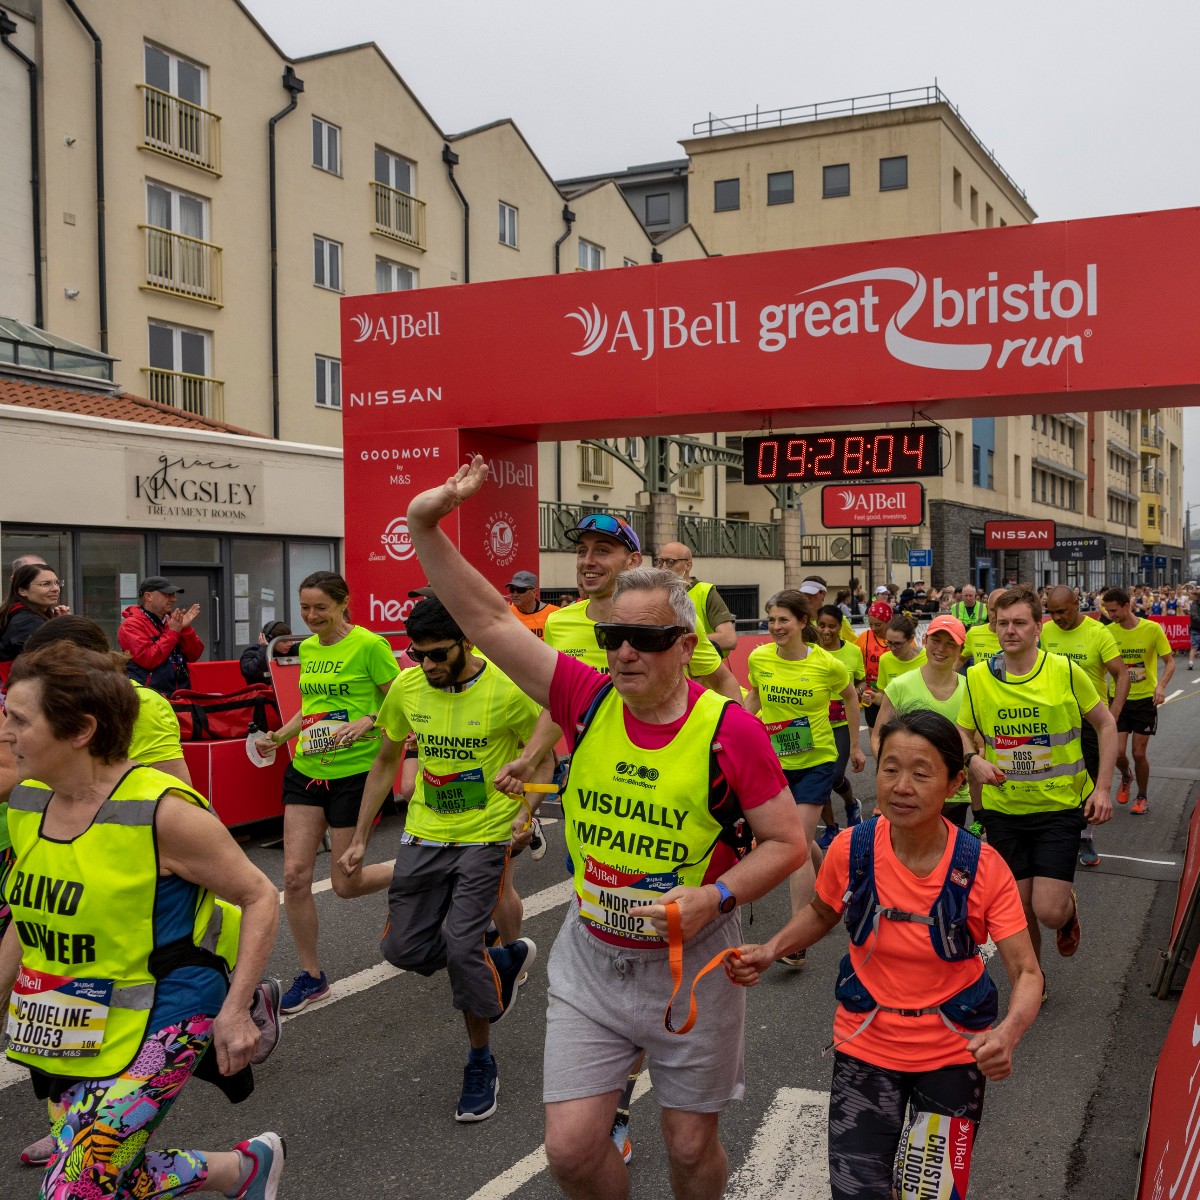 Best of luck to all the charities involved in the #GreatBristolRun this weekend! We hope your fundraisers smash their targets, enjoy the day! 🧡